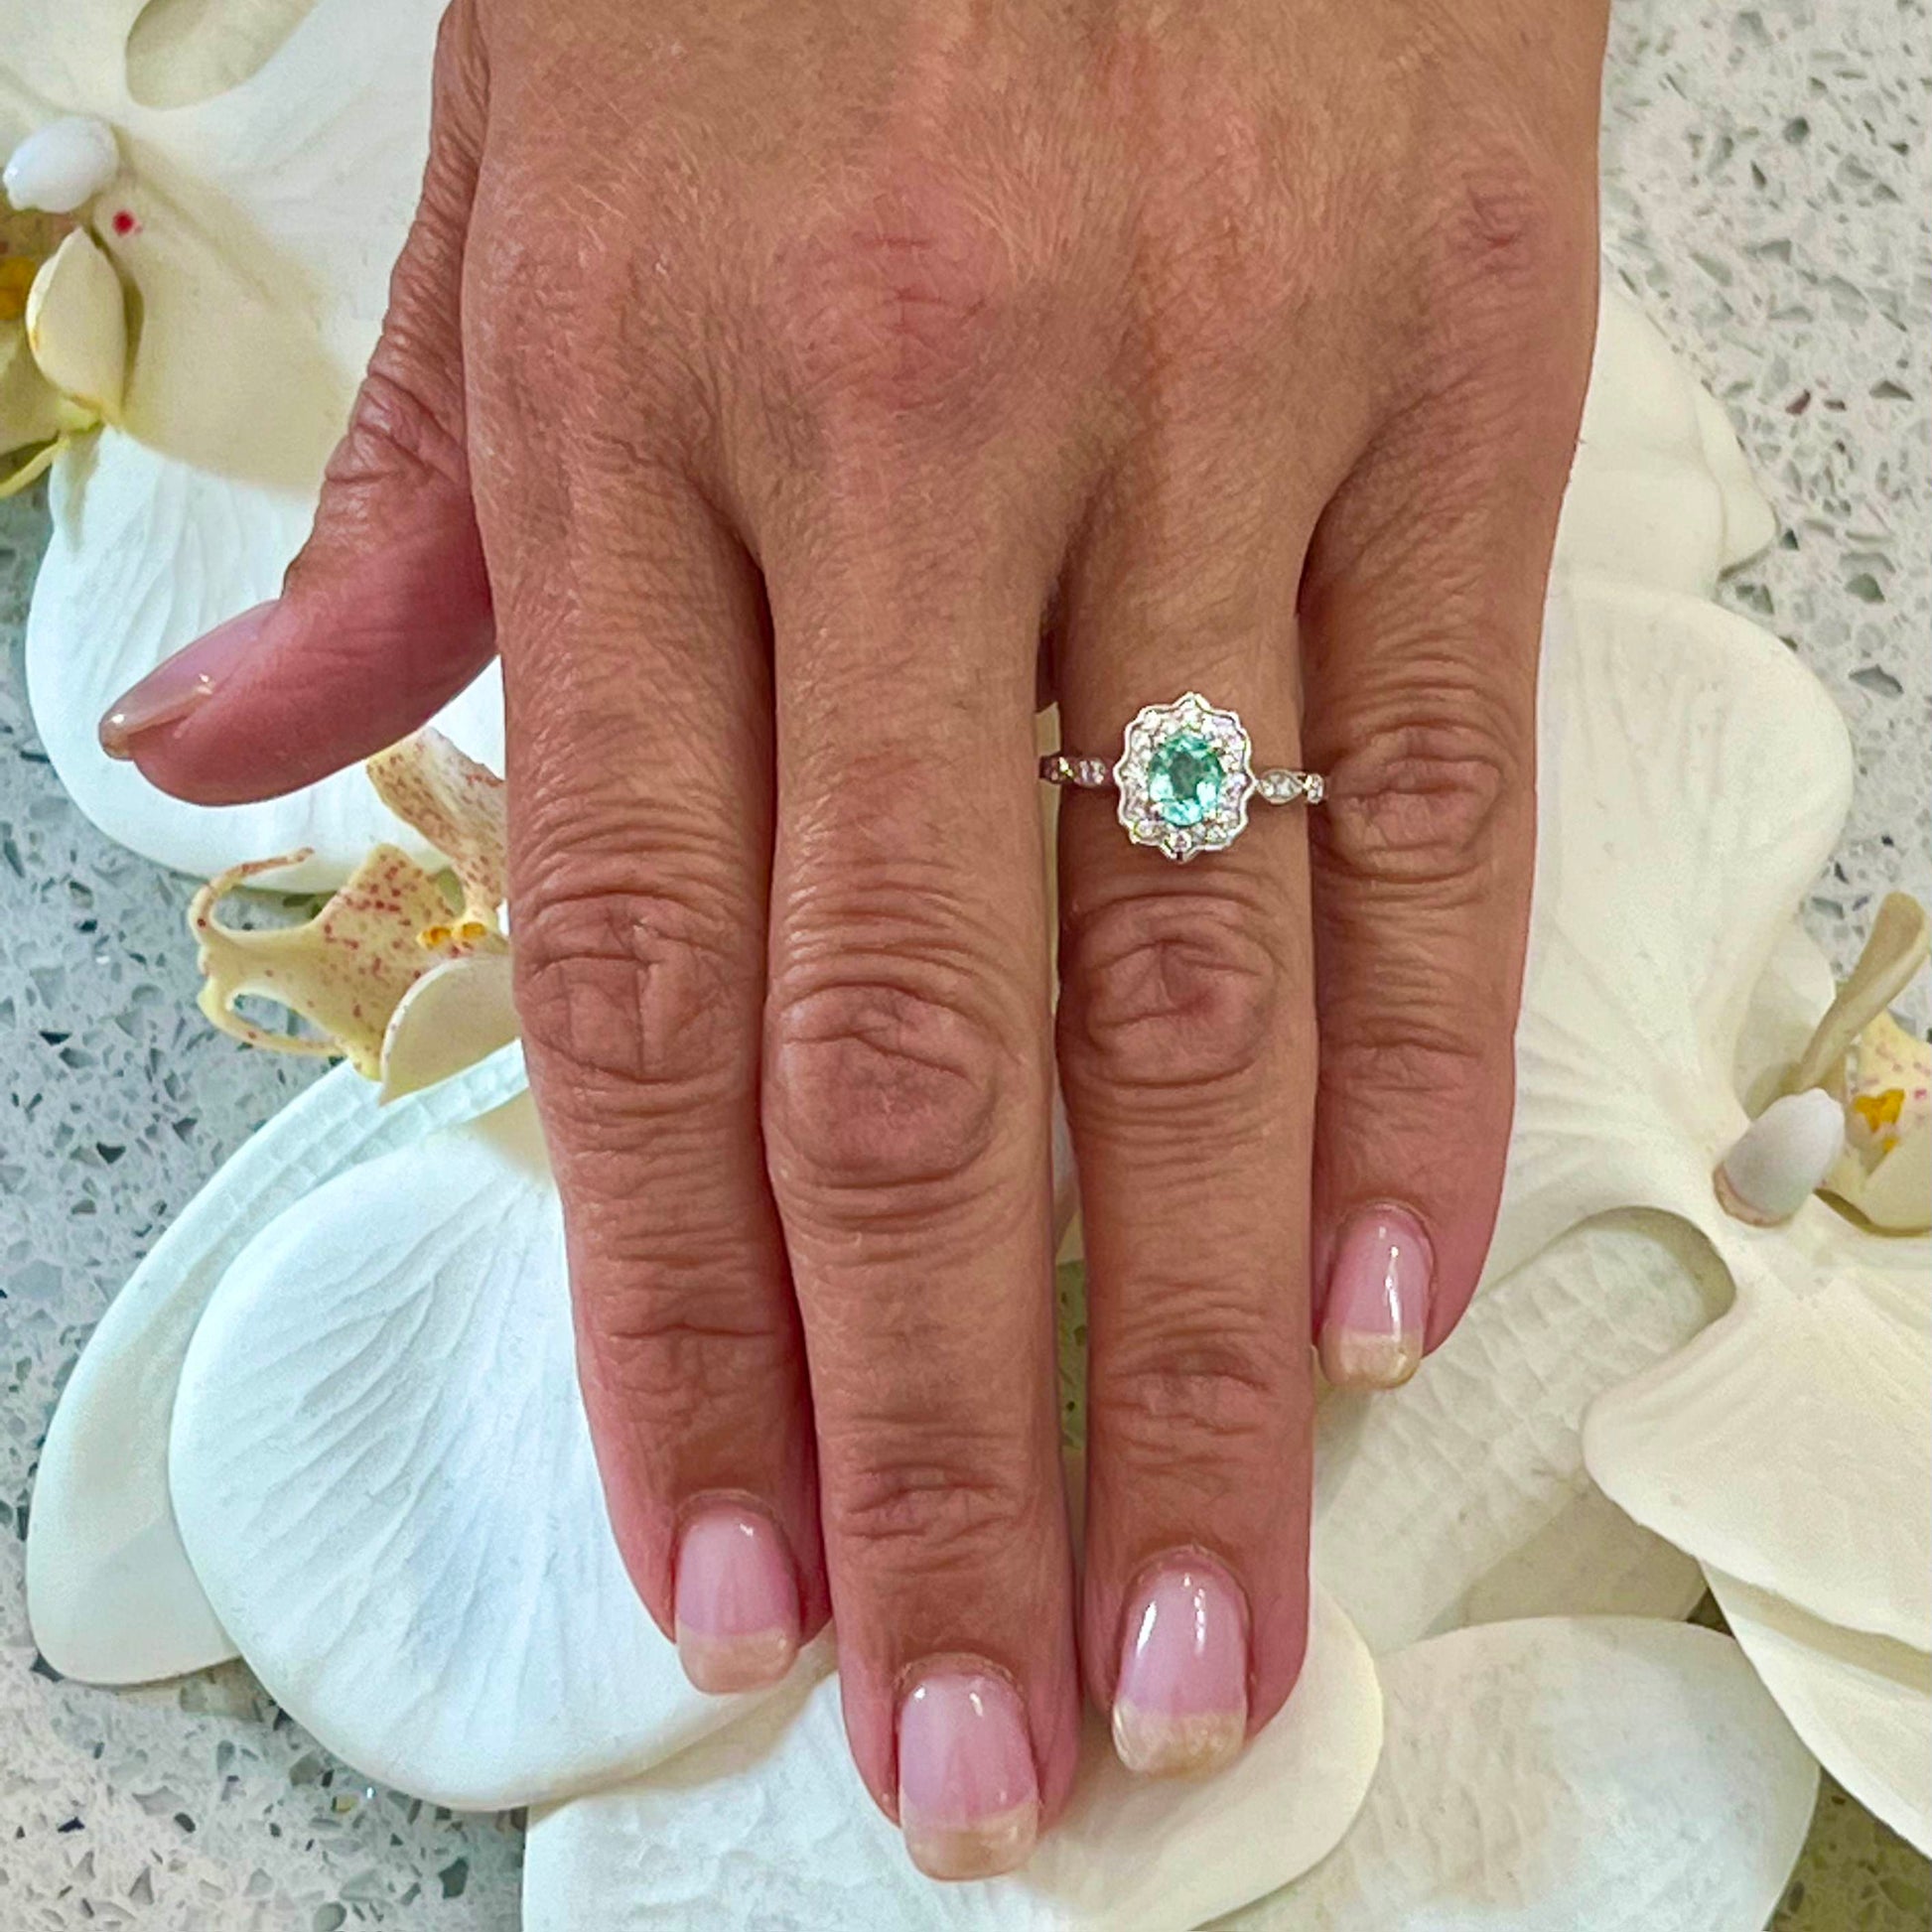 Natural Colombian Emerald Diamond Ring Size 6.5 14k W Gold 0.80 TCW Certified $4,750 216667 - Certified Fine Jewelry